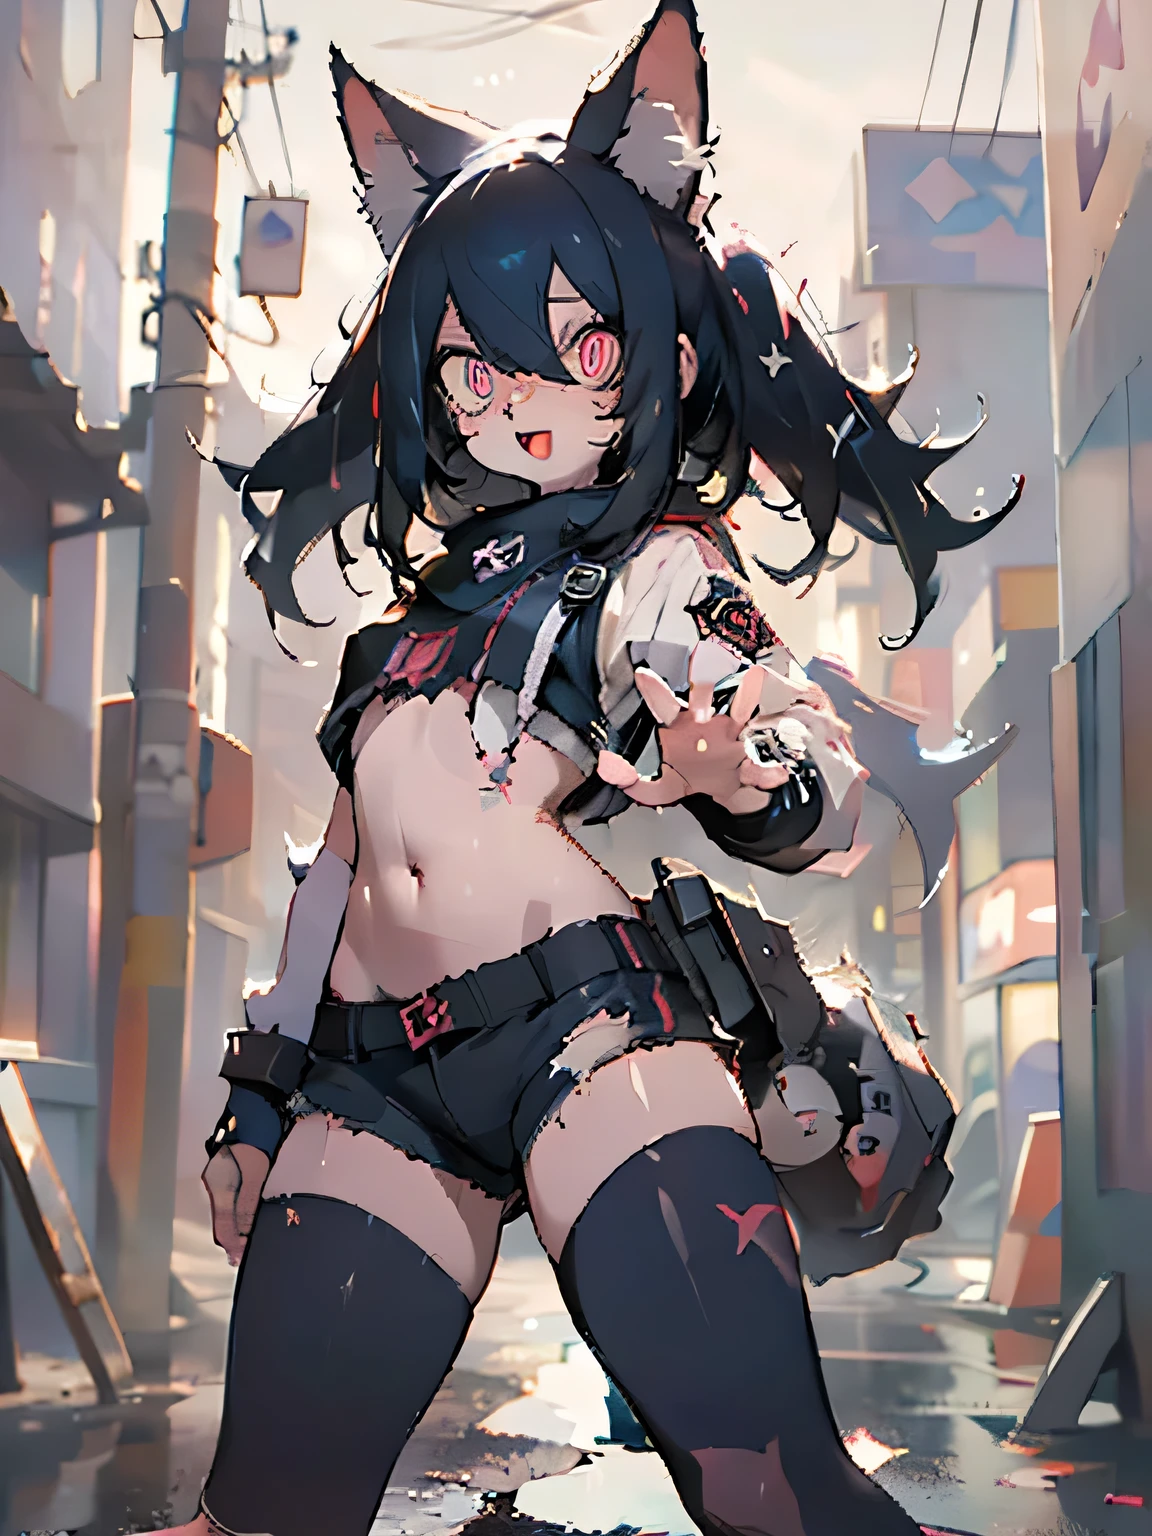 solo,1female\(cute,kawaii,age of 15,evil smile,floating hair,messy hair,(black hair:1.2),long hair,twin tails hair,pale skin,skin color blue,red eyes,eyes shining,big eyes,(ripped clothes:1.5),tight tube top,(breast:1.4),tight hot pants,(open stomach:1.4),(punk fashion:1.4),fluffy black cat-ear,(dynamic pose:1.7),(cute pose),open mouth,better hands,Perfect Hands\), BREAK ,background\(outside,noisy city,backstreet,narrow street,(dark:2.0),neon lights\),[chibi],[nsfw:2.0],quality\(8k,wallpaper of extremely detailed CG unit, ​masterpiece,hight resolution,top-quality,top-quality real texture skin,hyper realisitic,increase the resolution,RAW photos,best qualtiy,highly detailed,the wallpaper/),(close up:1.0),[nsfw:2.0],[nsfw:2.0],[nsfw:2.0],[nsfw:2.0],[nsfw:2.0]